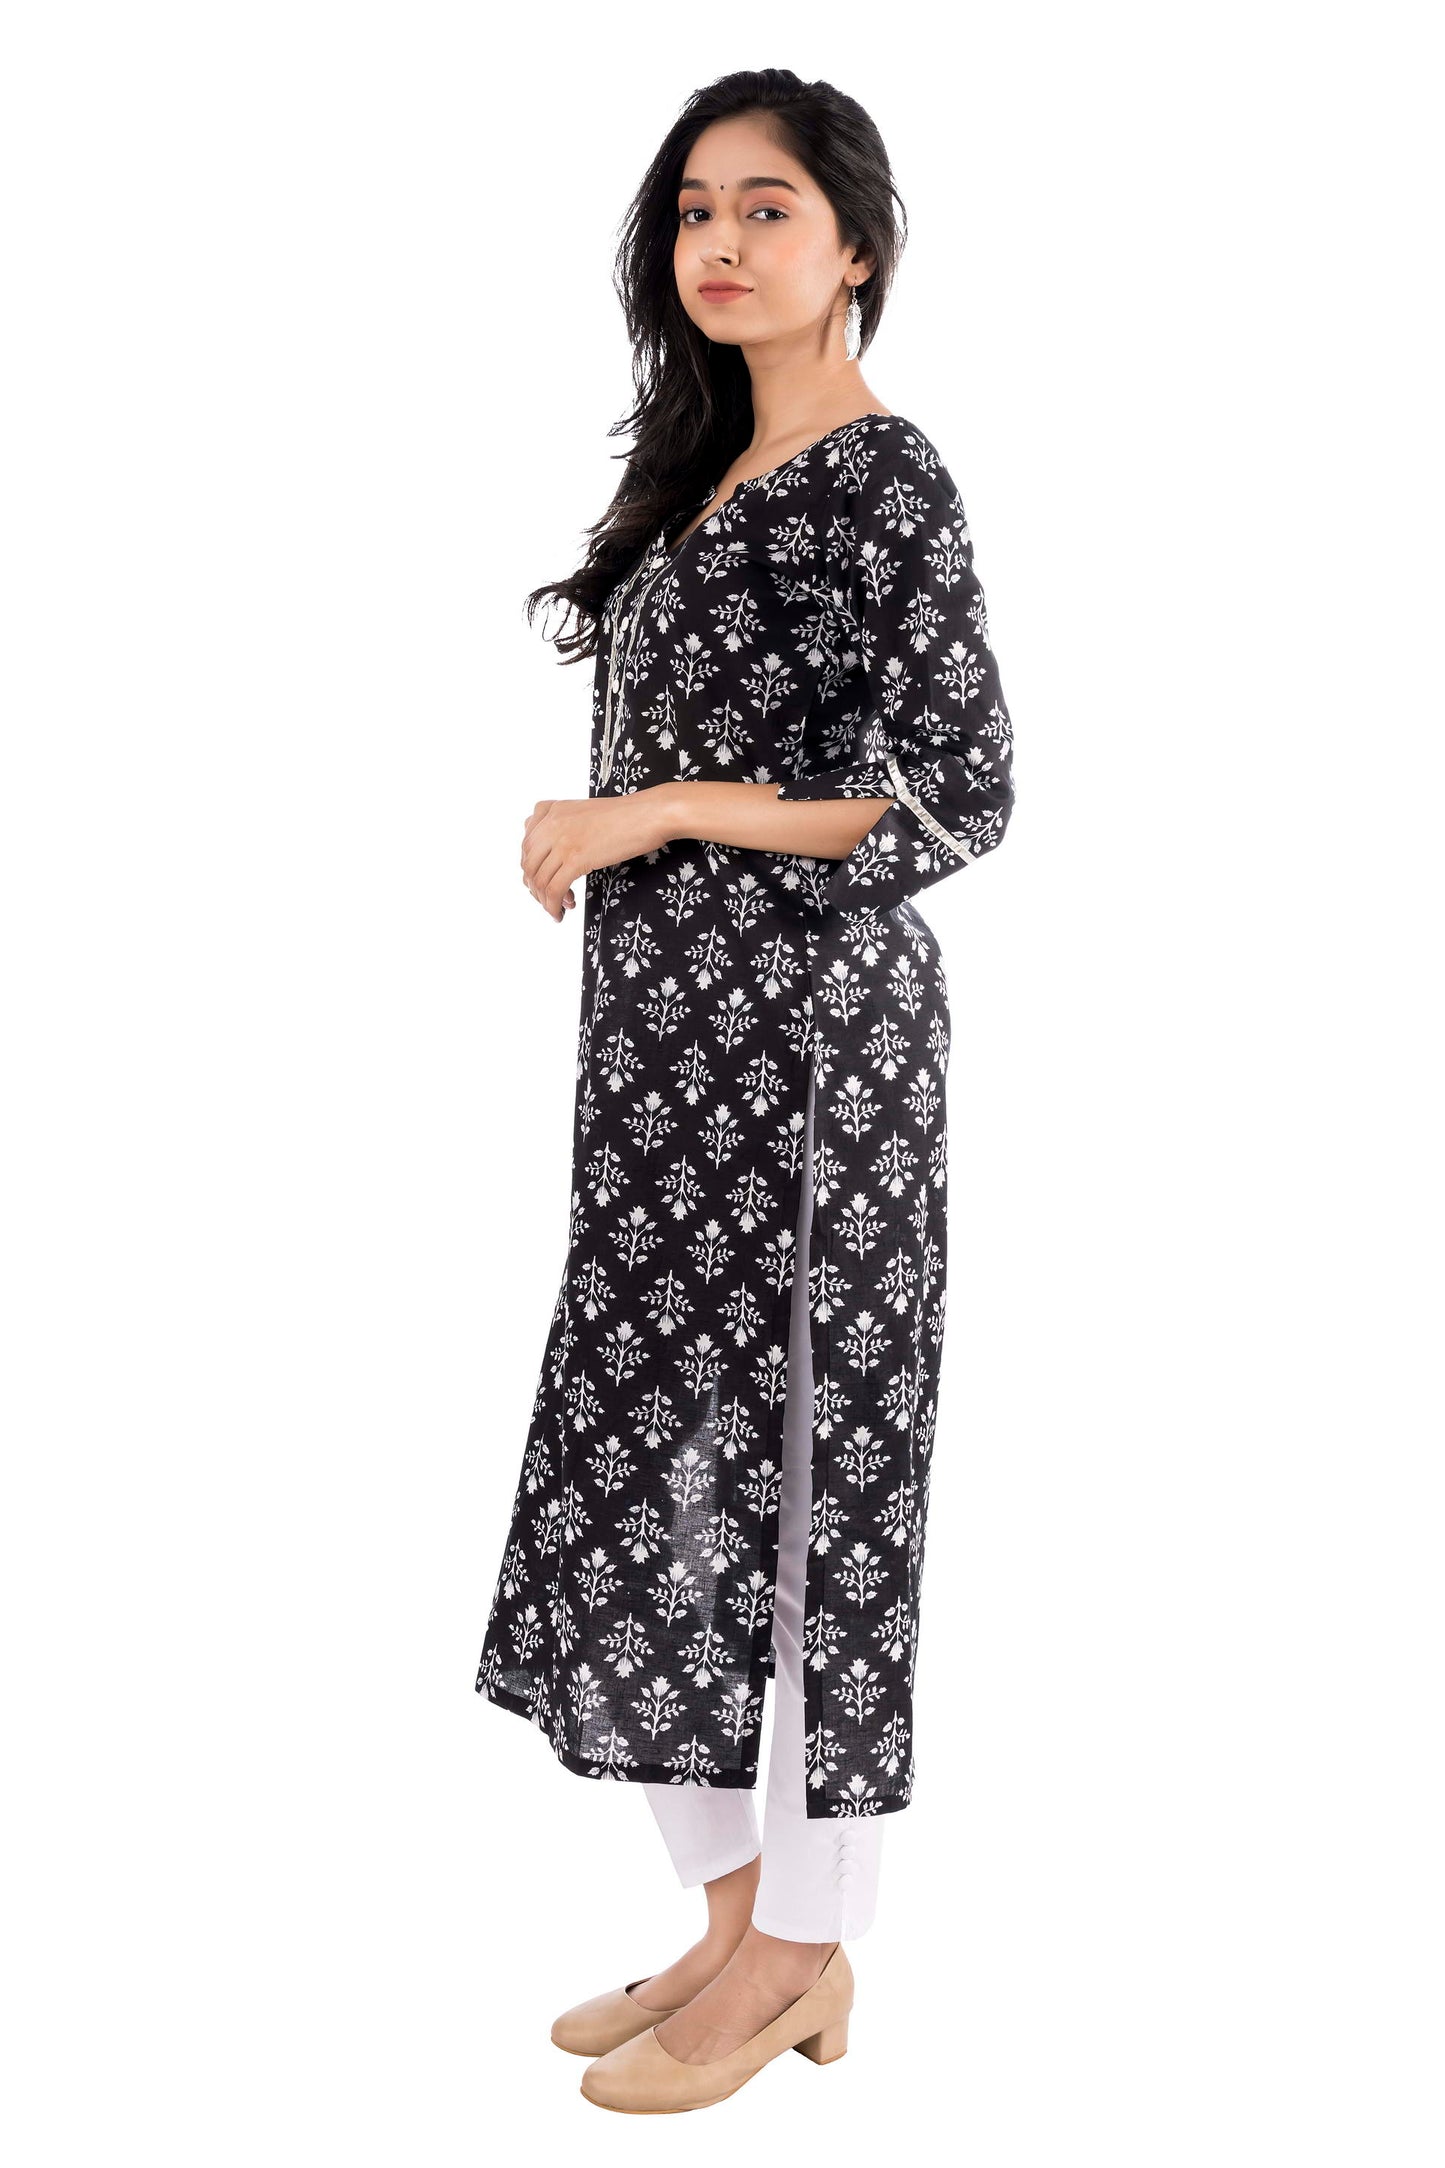 MAGNETISM Cotton Fabric Floral Printed Round Neck Kurti